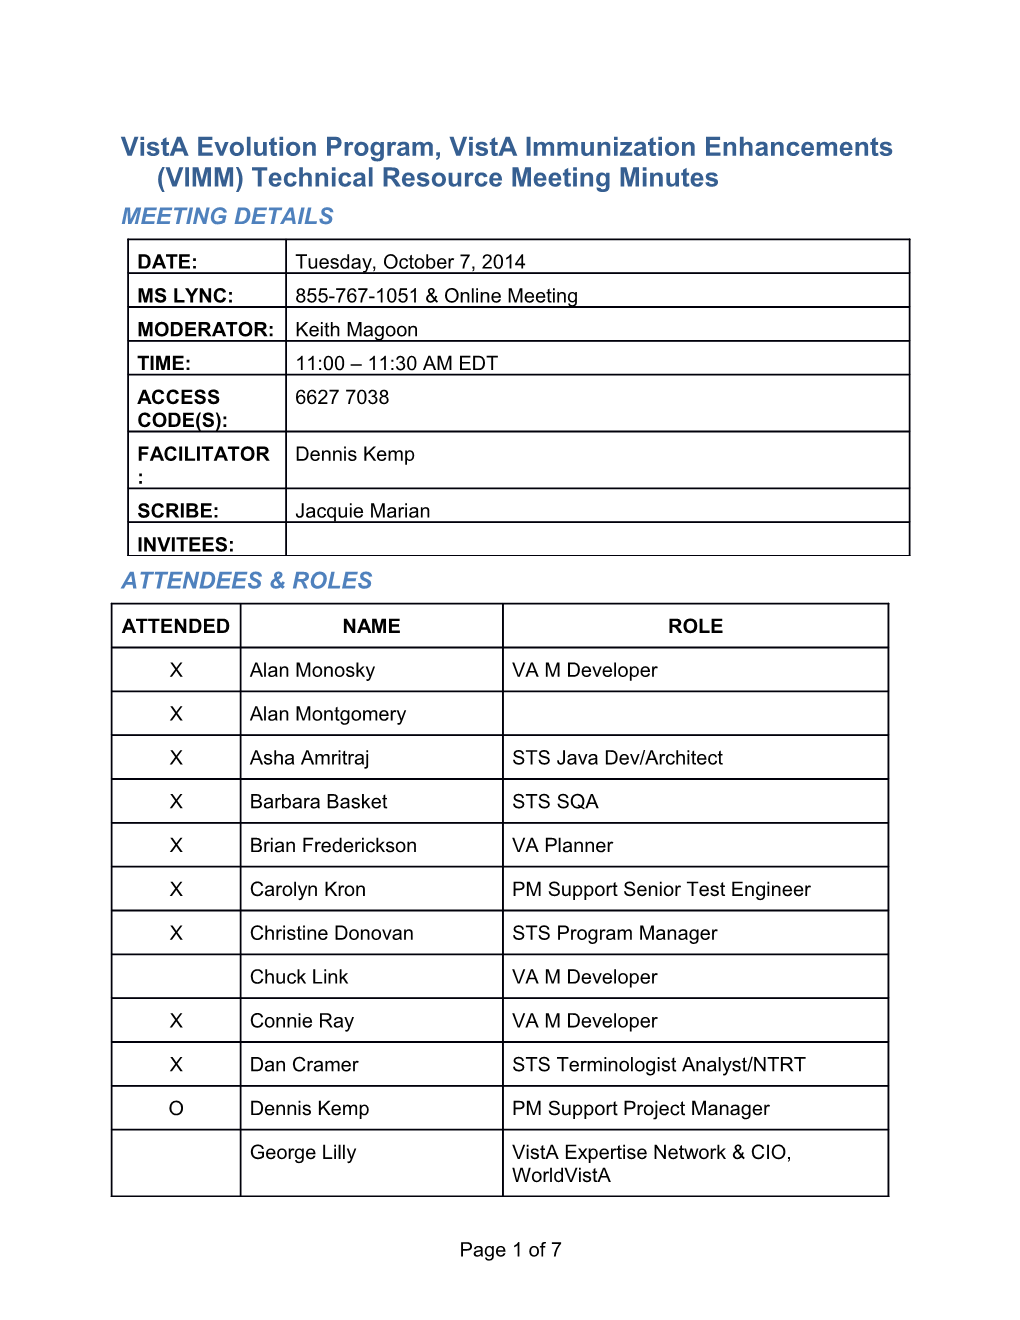 VIMM Technical Resource Meeting Minutes